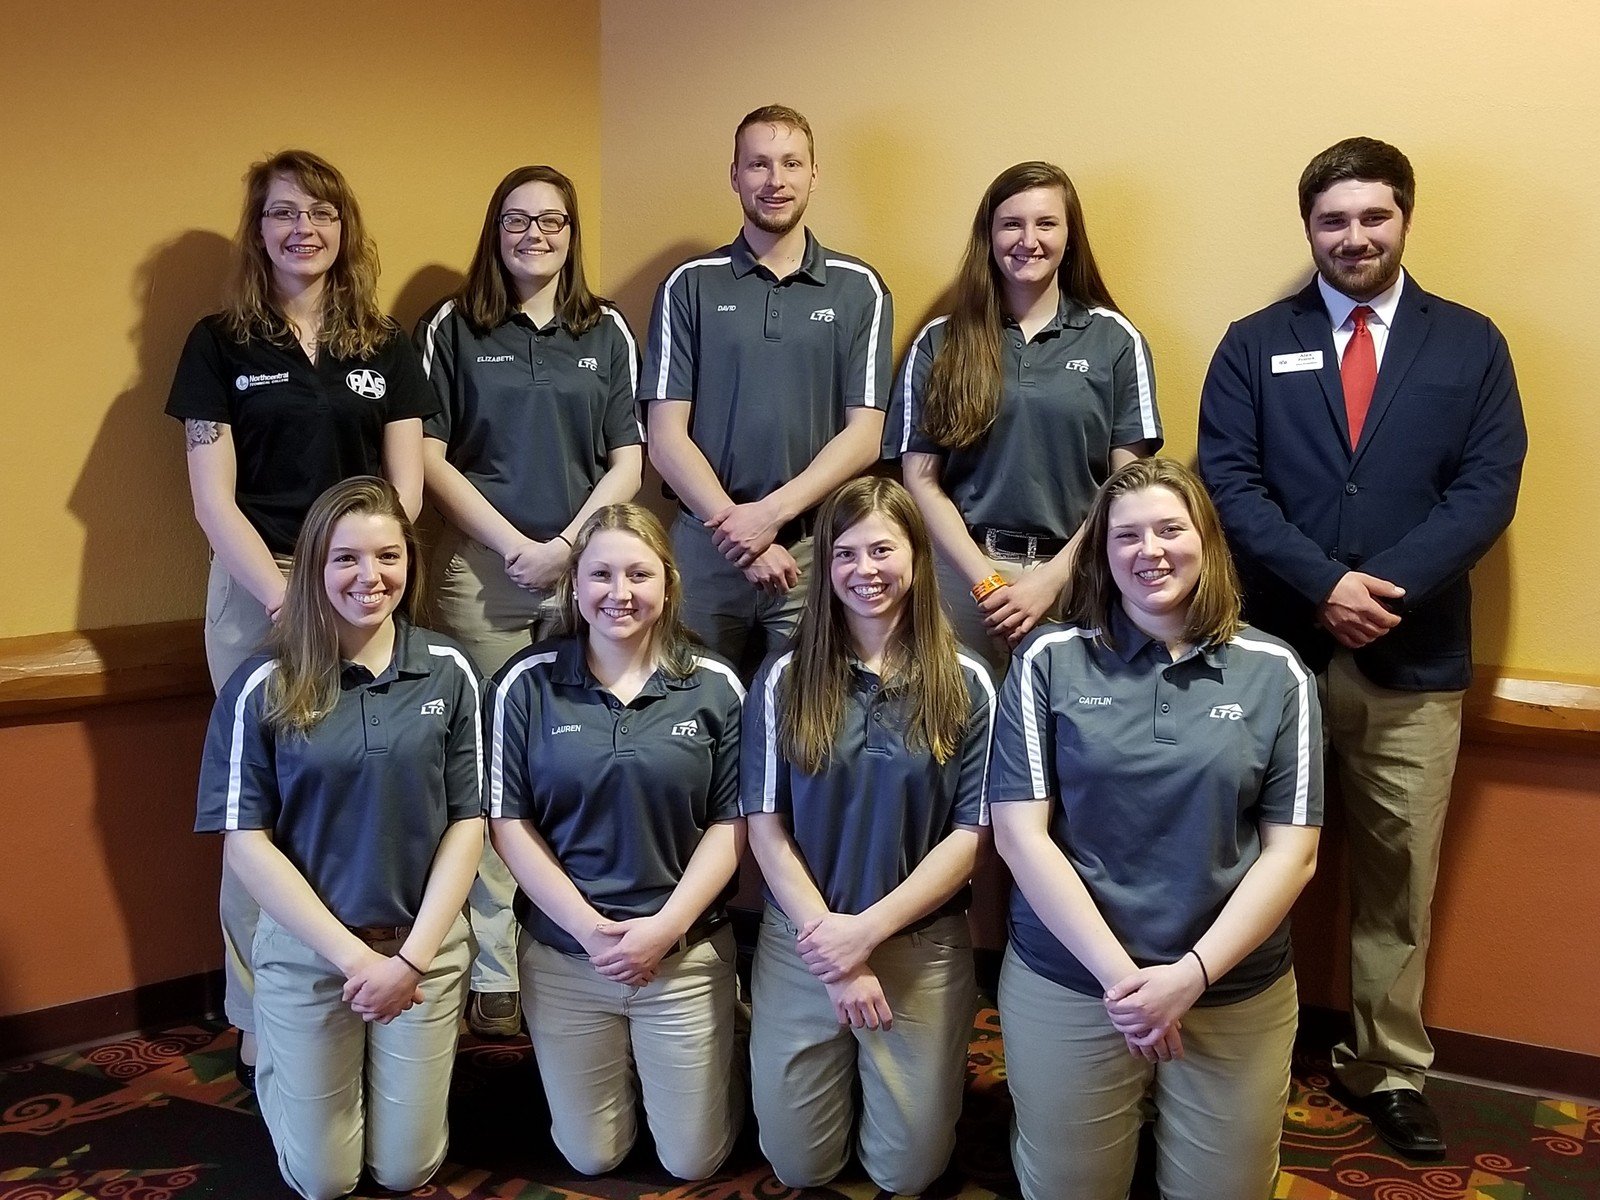 LTC students Elizabeth Benicke and Molly Henschel, and Northcentral Technical College student Kailey Schug took first place in Dairy Specialist Team competition at the state Professional Agricultural Student competition.